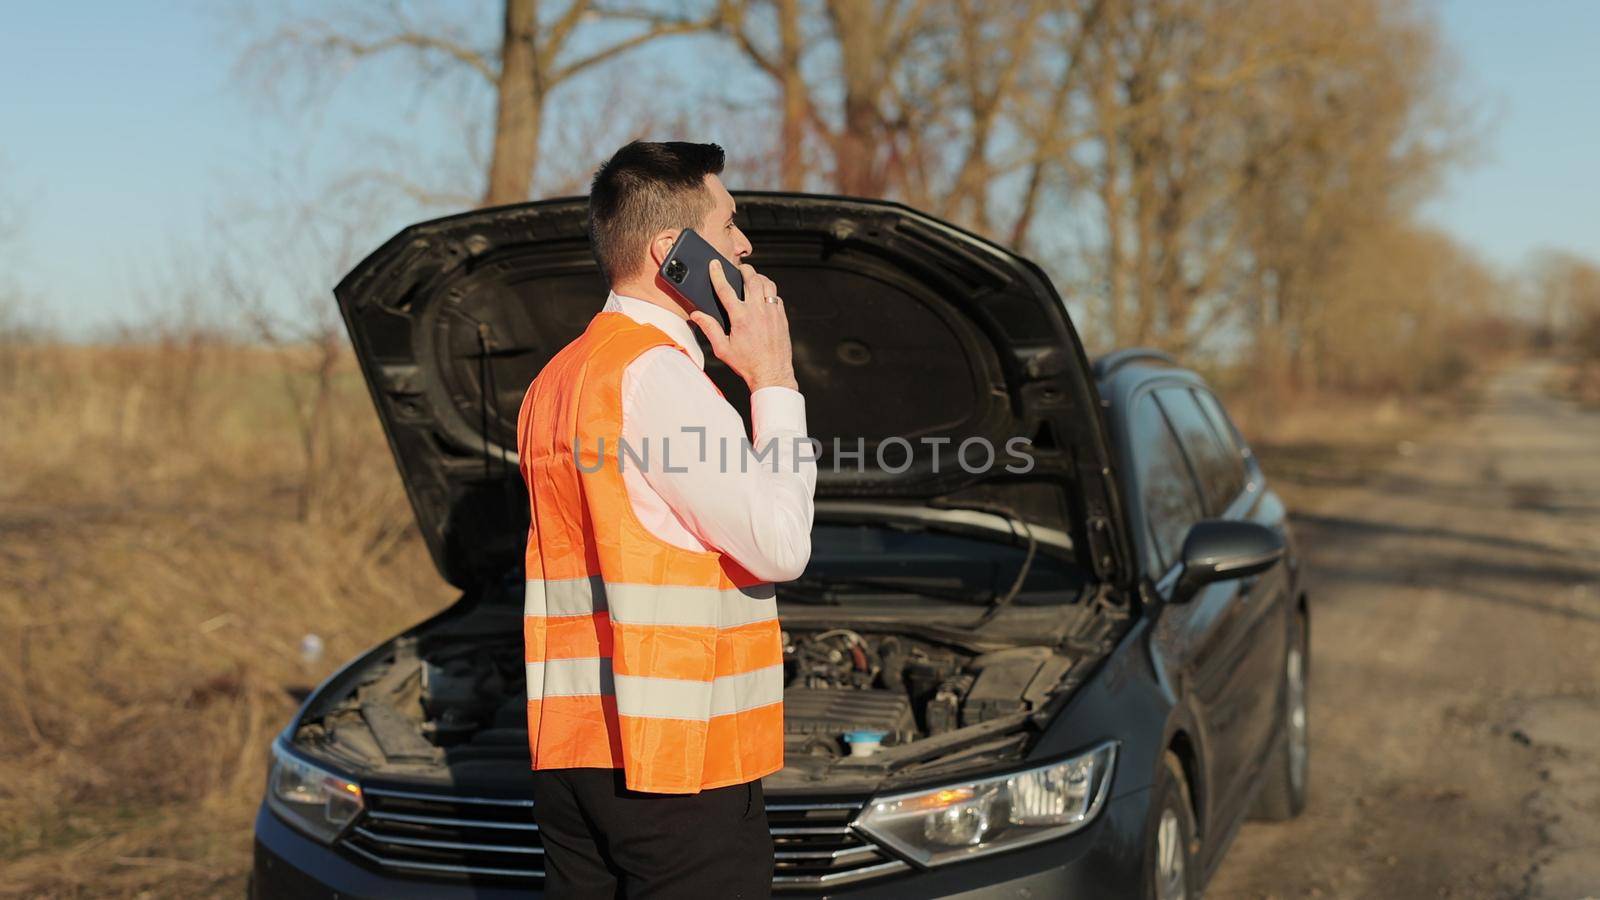 Stranded man with broken down car calls for help. Young man standing speak on phone calling car assistance services, near the broken car opened the hood look road help repair. Emergency stop sign.